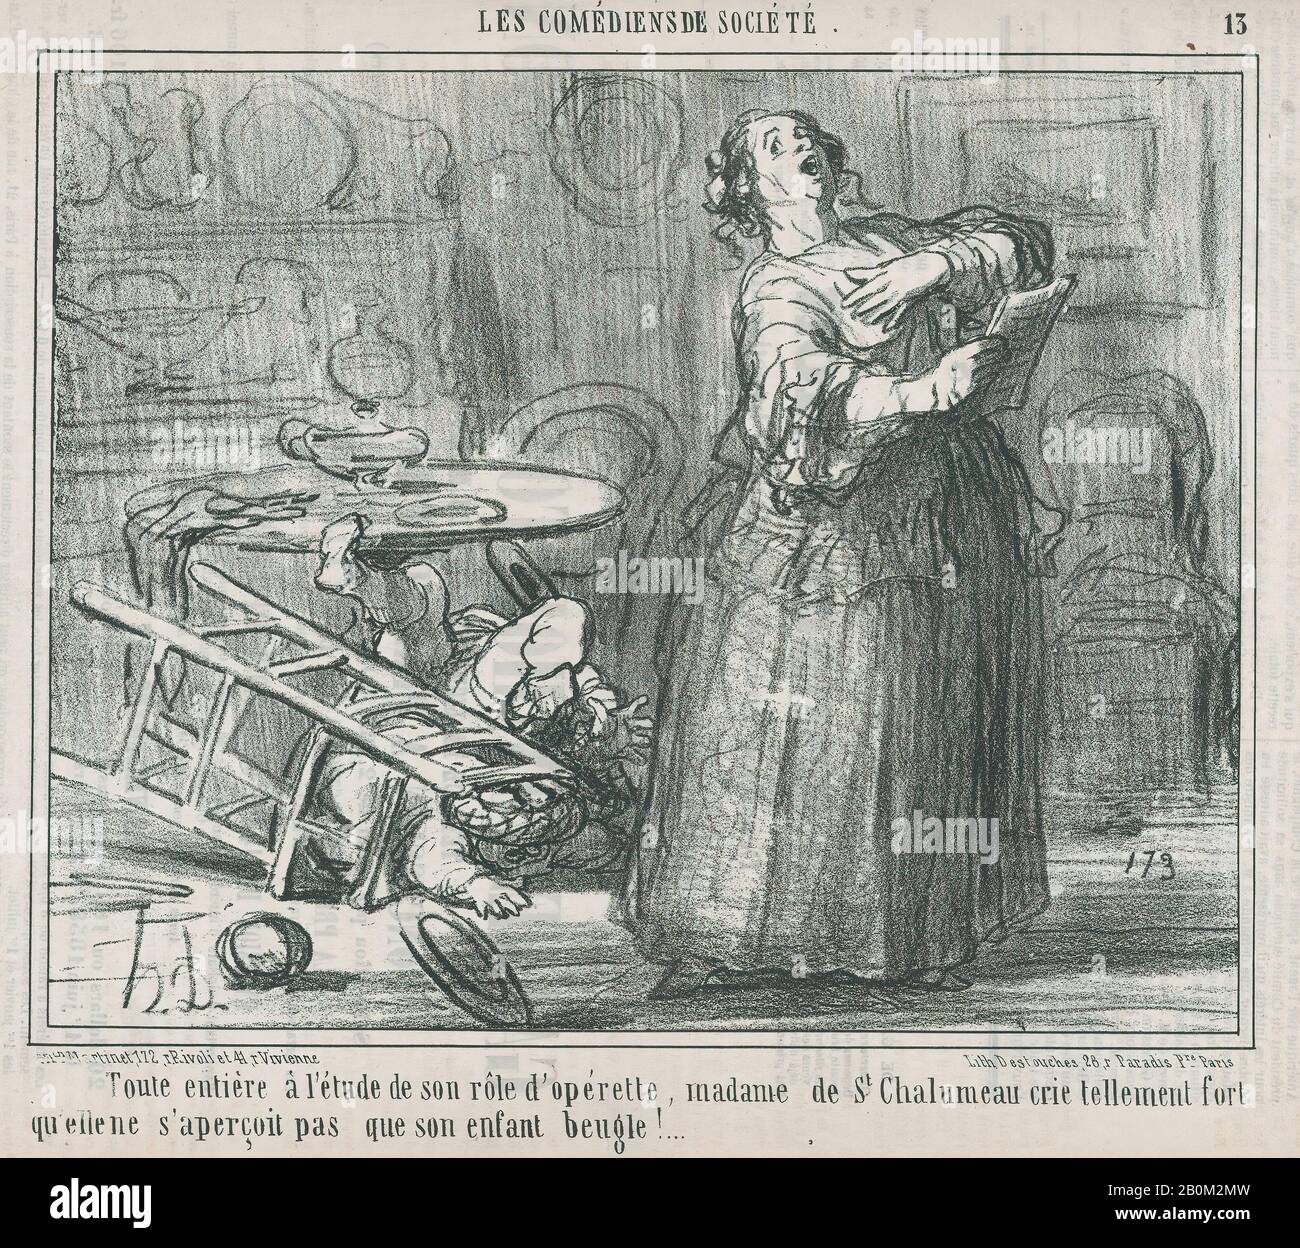 https://c8.alamy.com/comp/2B0M2MW/honor-daumier-toute-entire-ltude-de-son-rle-doprette-from-les-comediens-de-socit-published-in-le-charivari-may-8-1858-les-comdiens-de-socit-honor-daumier-french-marseilles-18081879-valmondois-may-8-1858-lithograph-on-newsprint-second-state-of-two-delteil-sheet-9-1316-14-716-in-25-366-cm-image-7-78-9-1316-in-20-249-cm-prints-2B0M2MW.jpg